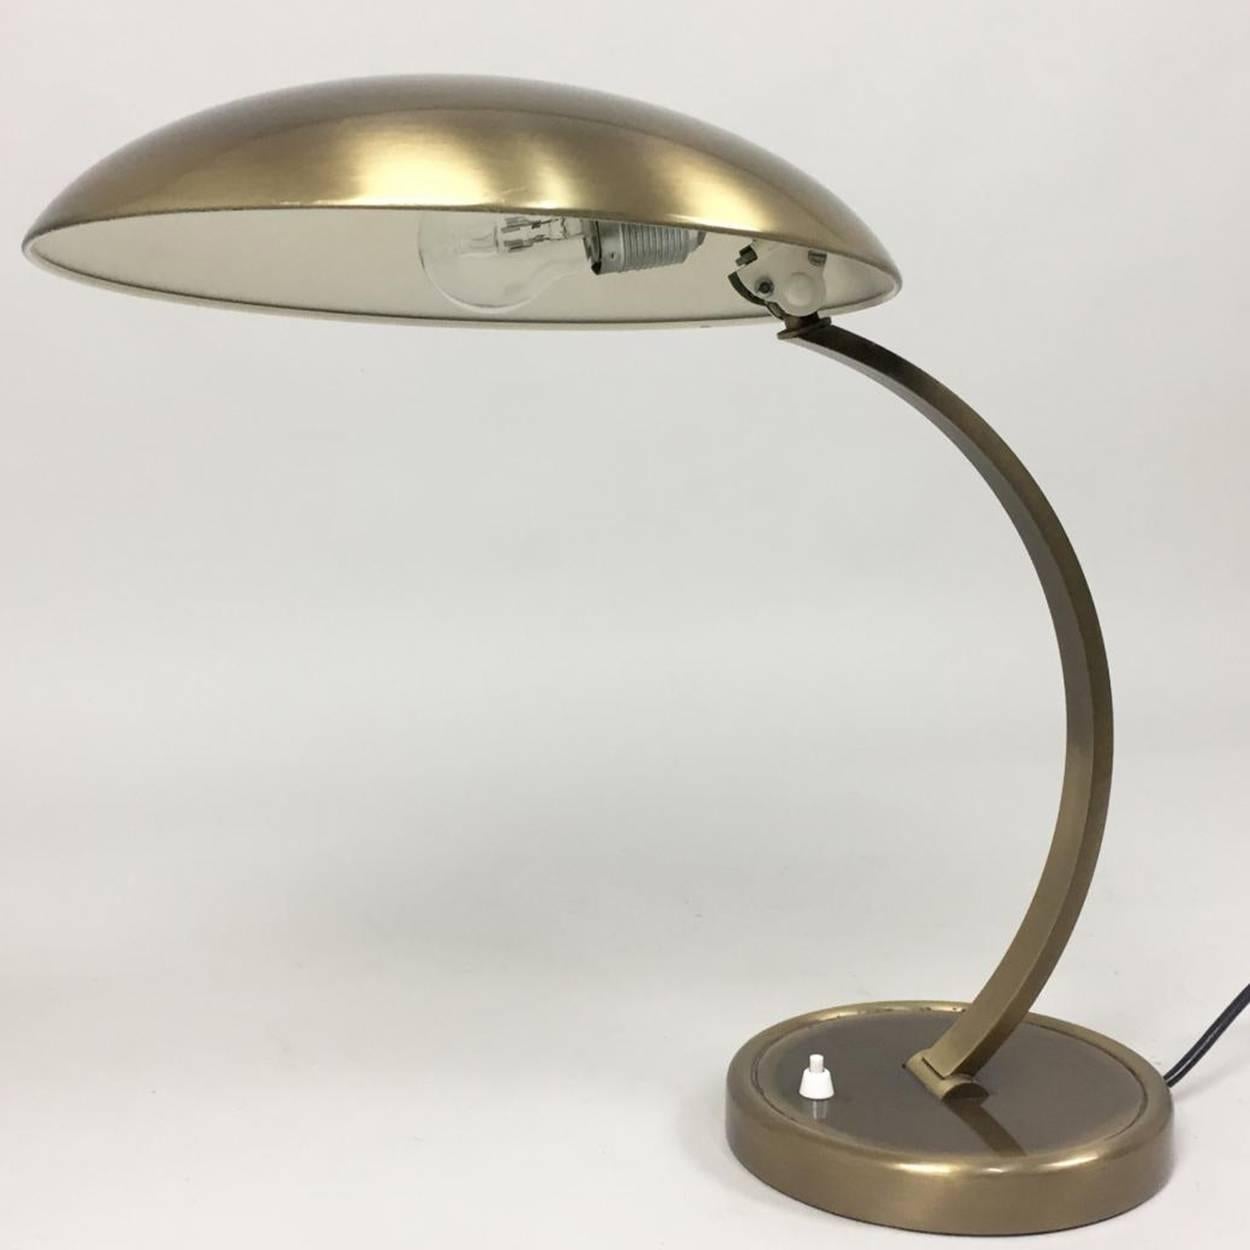 This beautiful patinated brass table lamp was designed by Christian Dell and was produced by Kaiser Idell in the 1950s. Both arm and shade are adjustable.

Industrial designer, silversmith, and teacher Christian Dell was born in 1893 in Offenbach,